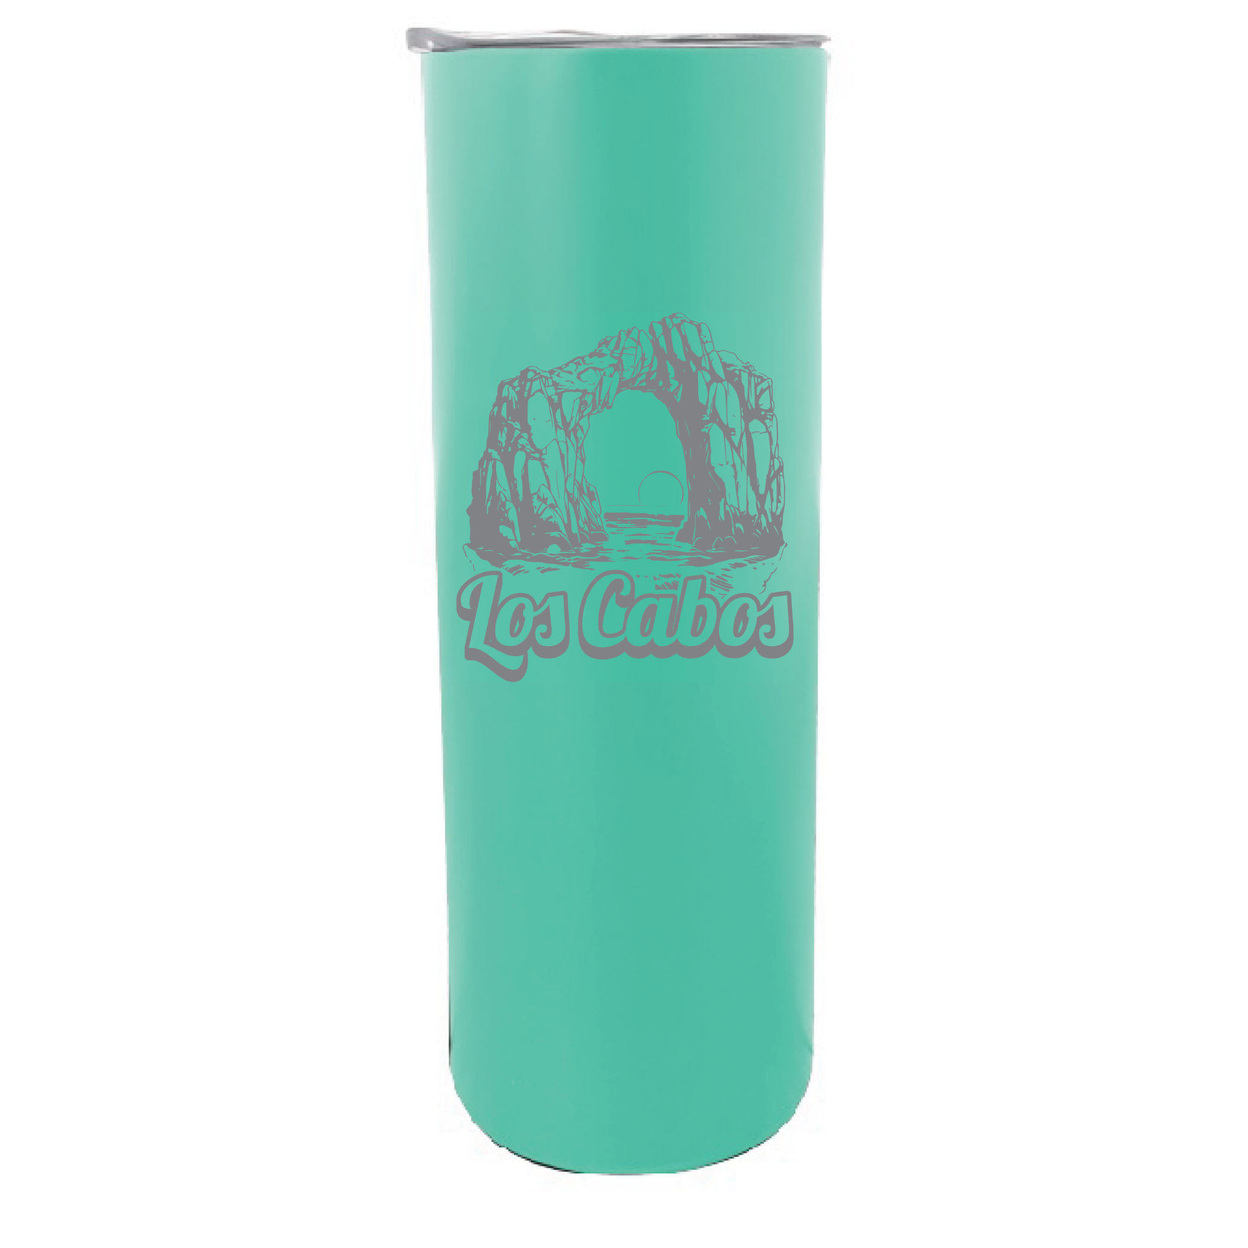 Los Cabos Mexico Souvenir 20 Oz Engraved Insulated Stainless Steel Skinny Tumbler - Black Glitter,,Single Unit